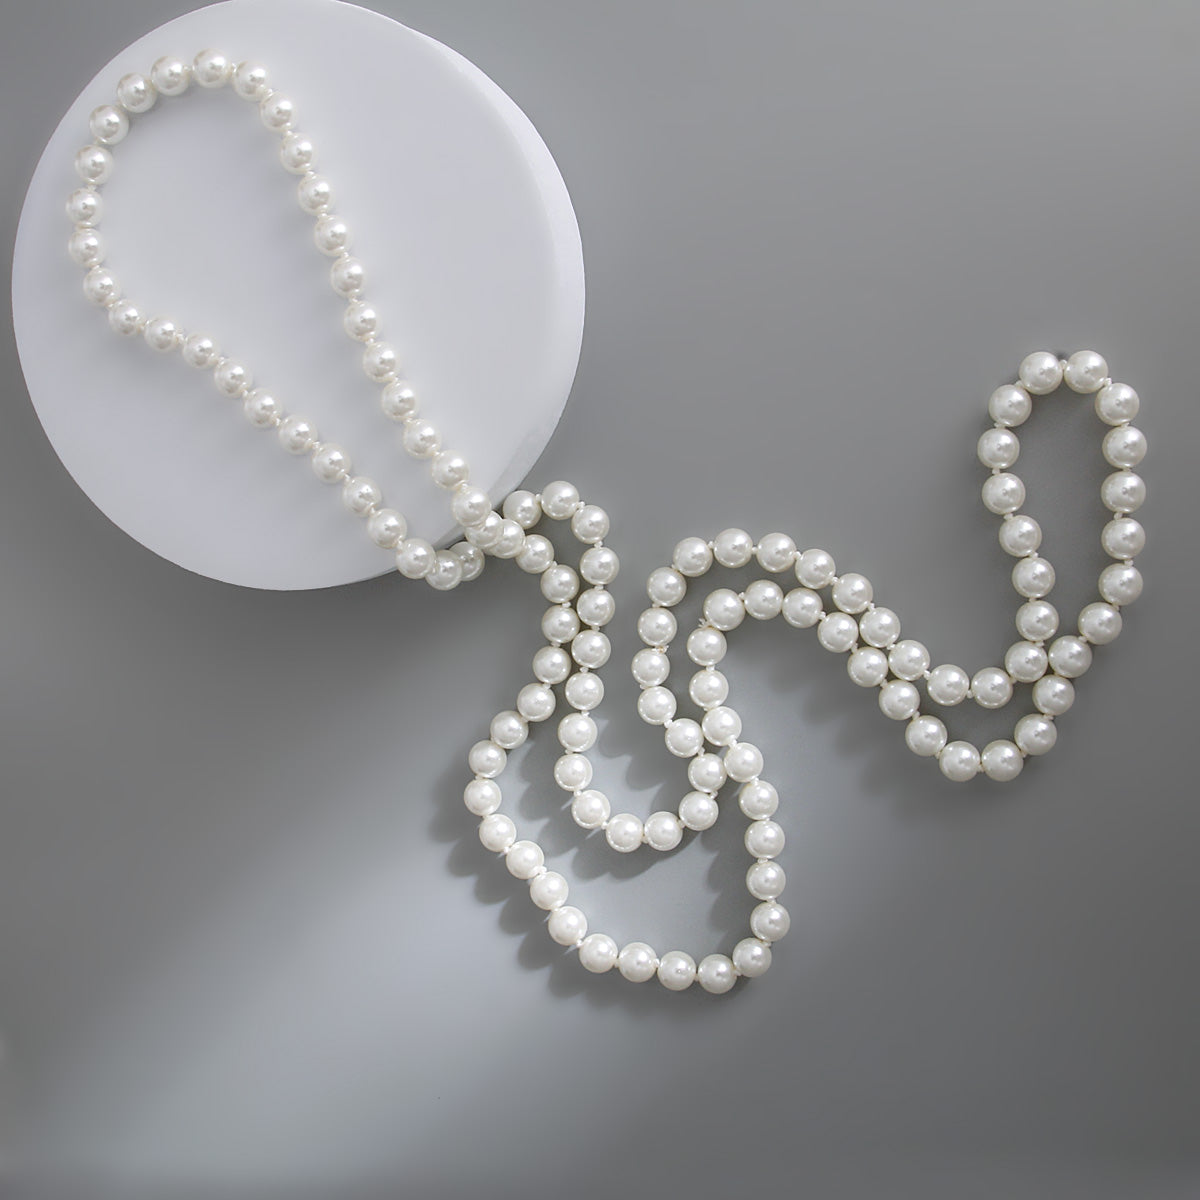 Cream 12mm Endless Glass Pearl Necklace